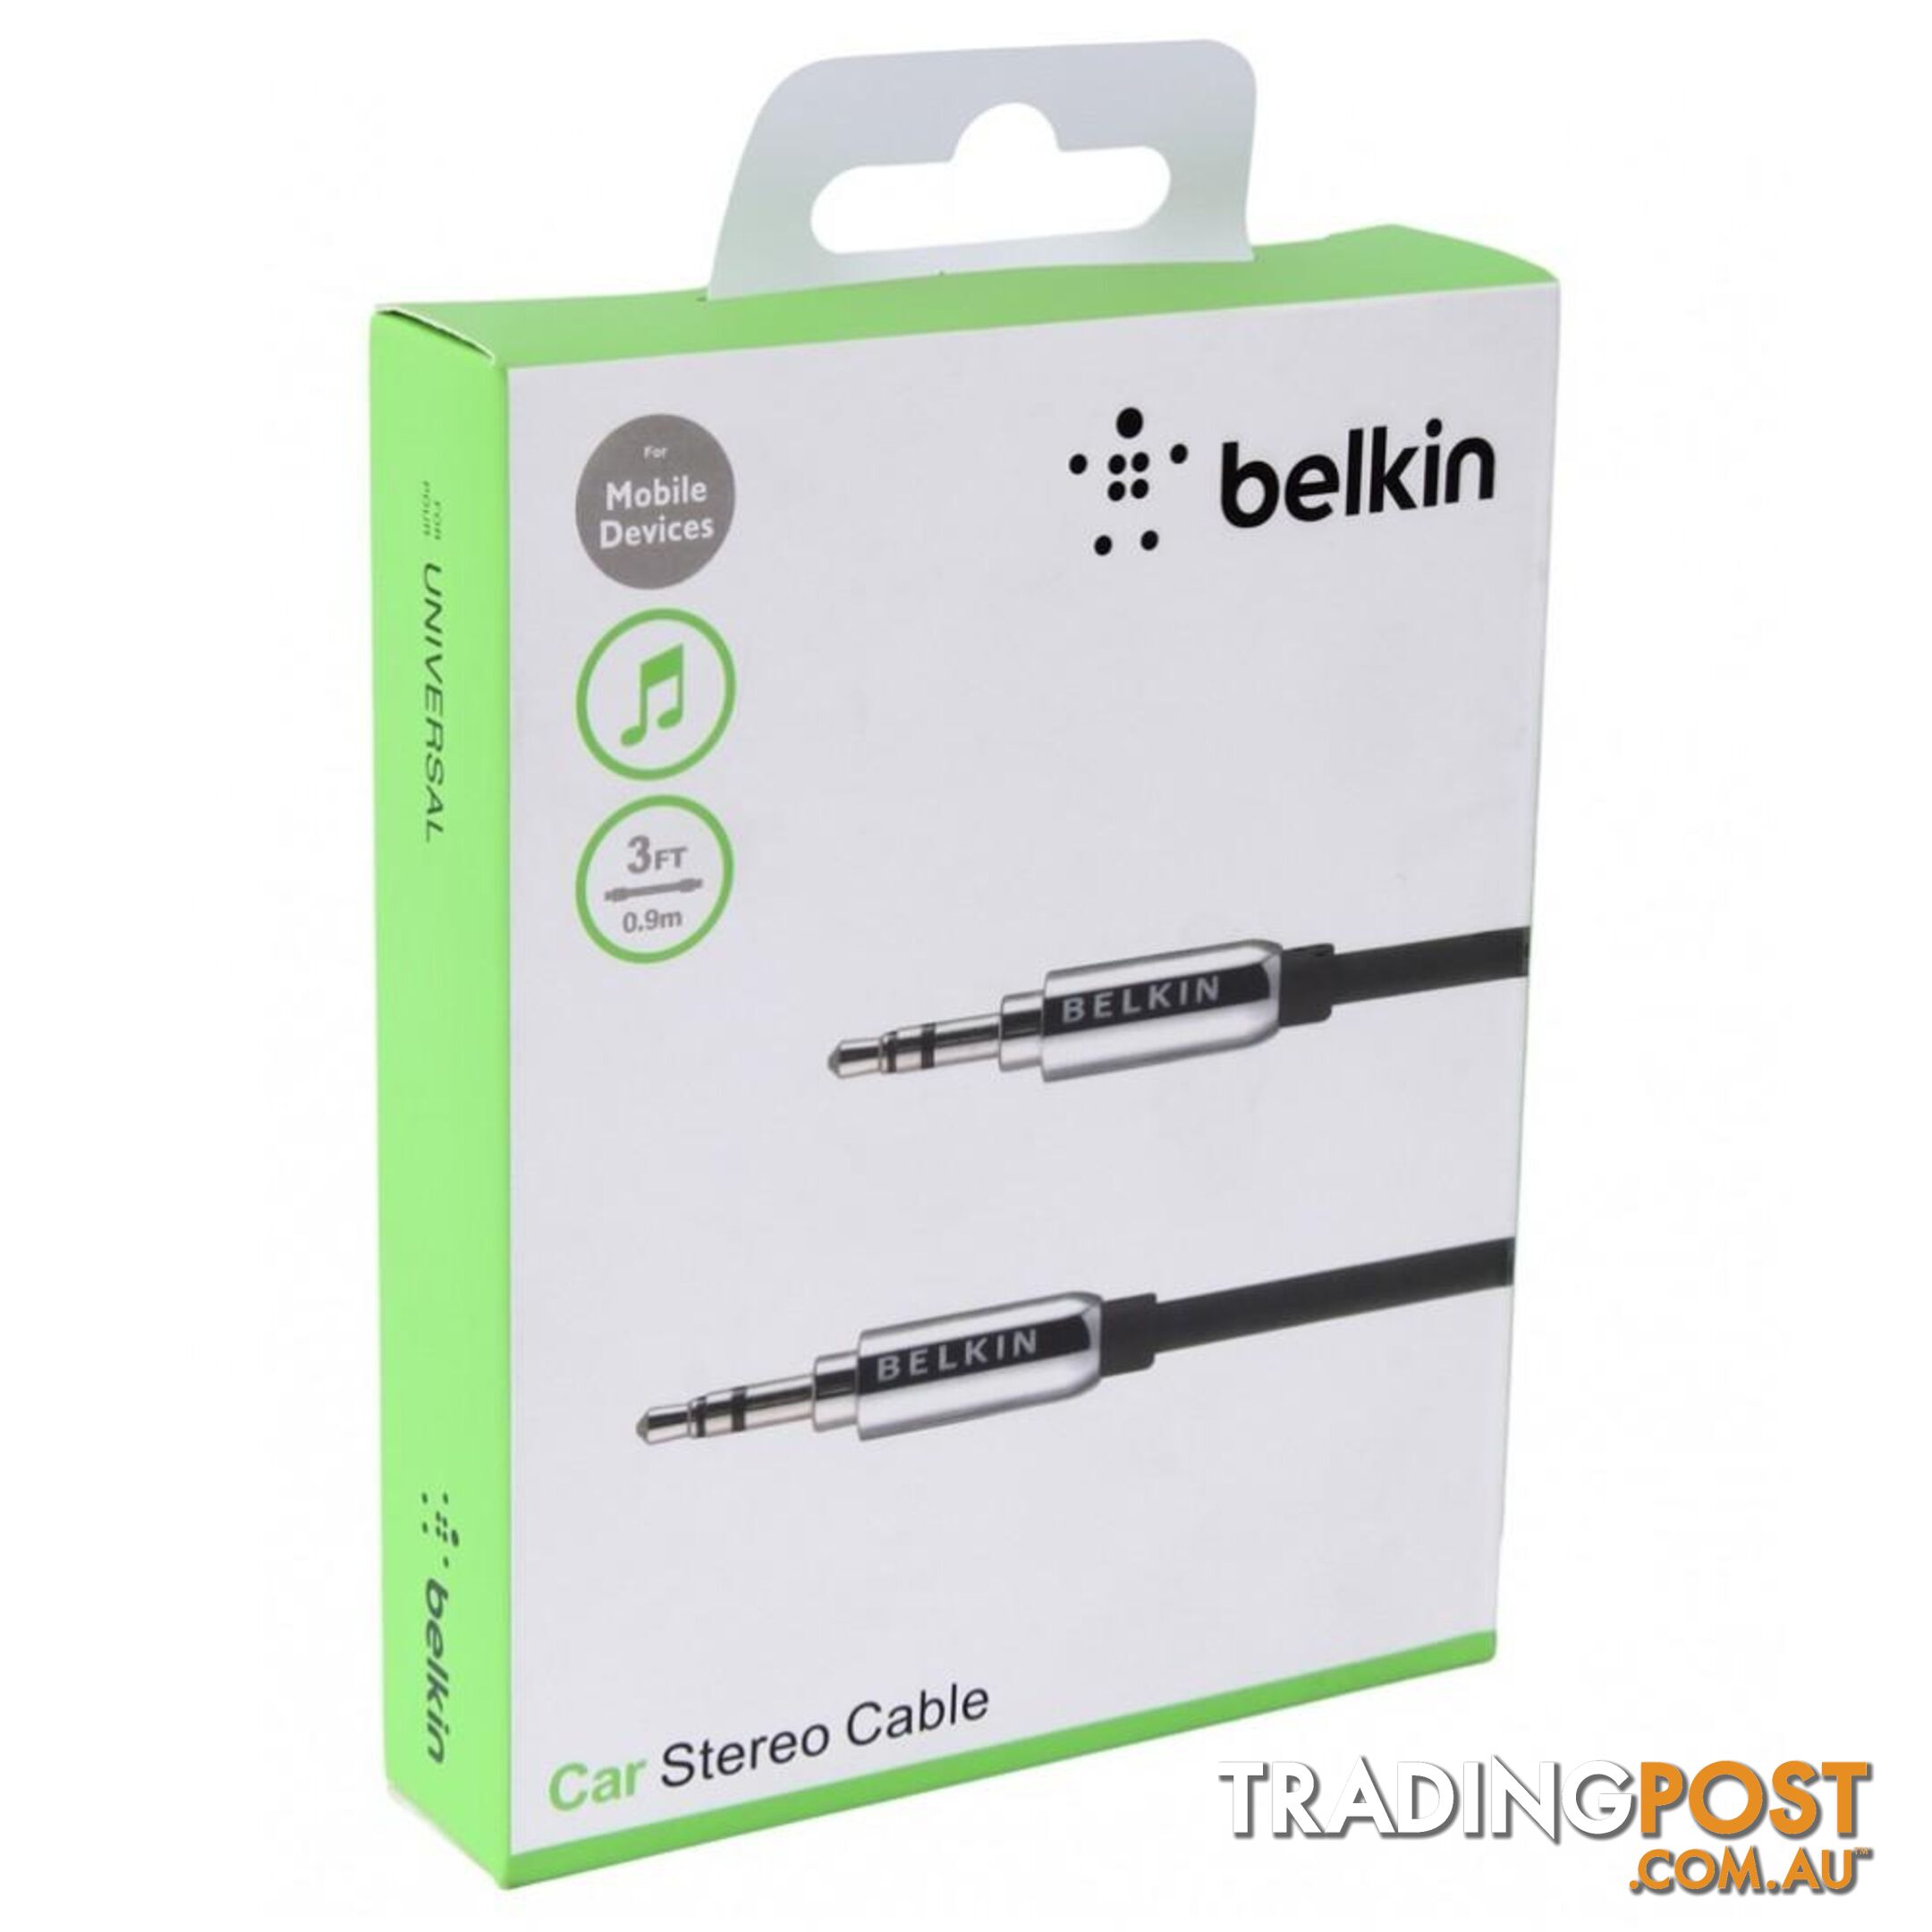 Belkin - 0.9M Car Stereo Cable - 123456907 - Headphones & Sound